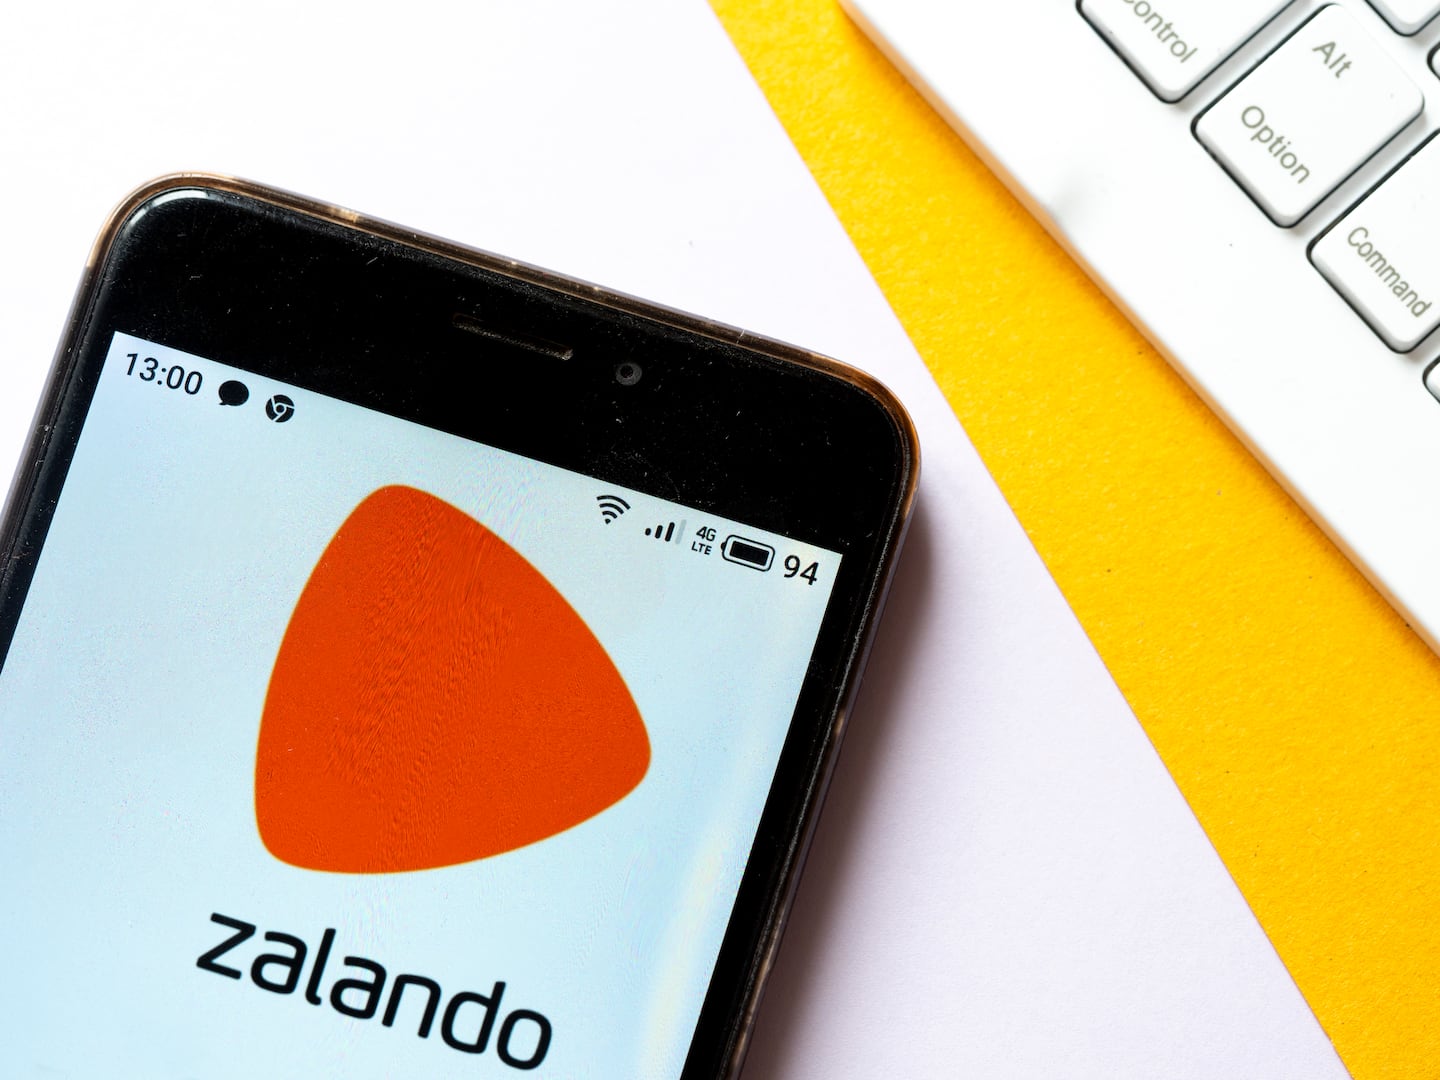 German e-tailer Zalando expects growth to accelerate in 2021. Photo: Getty Images.